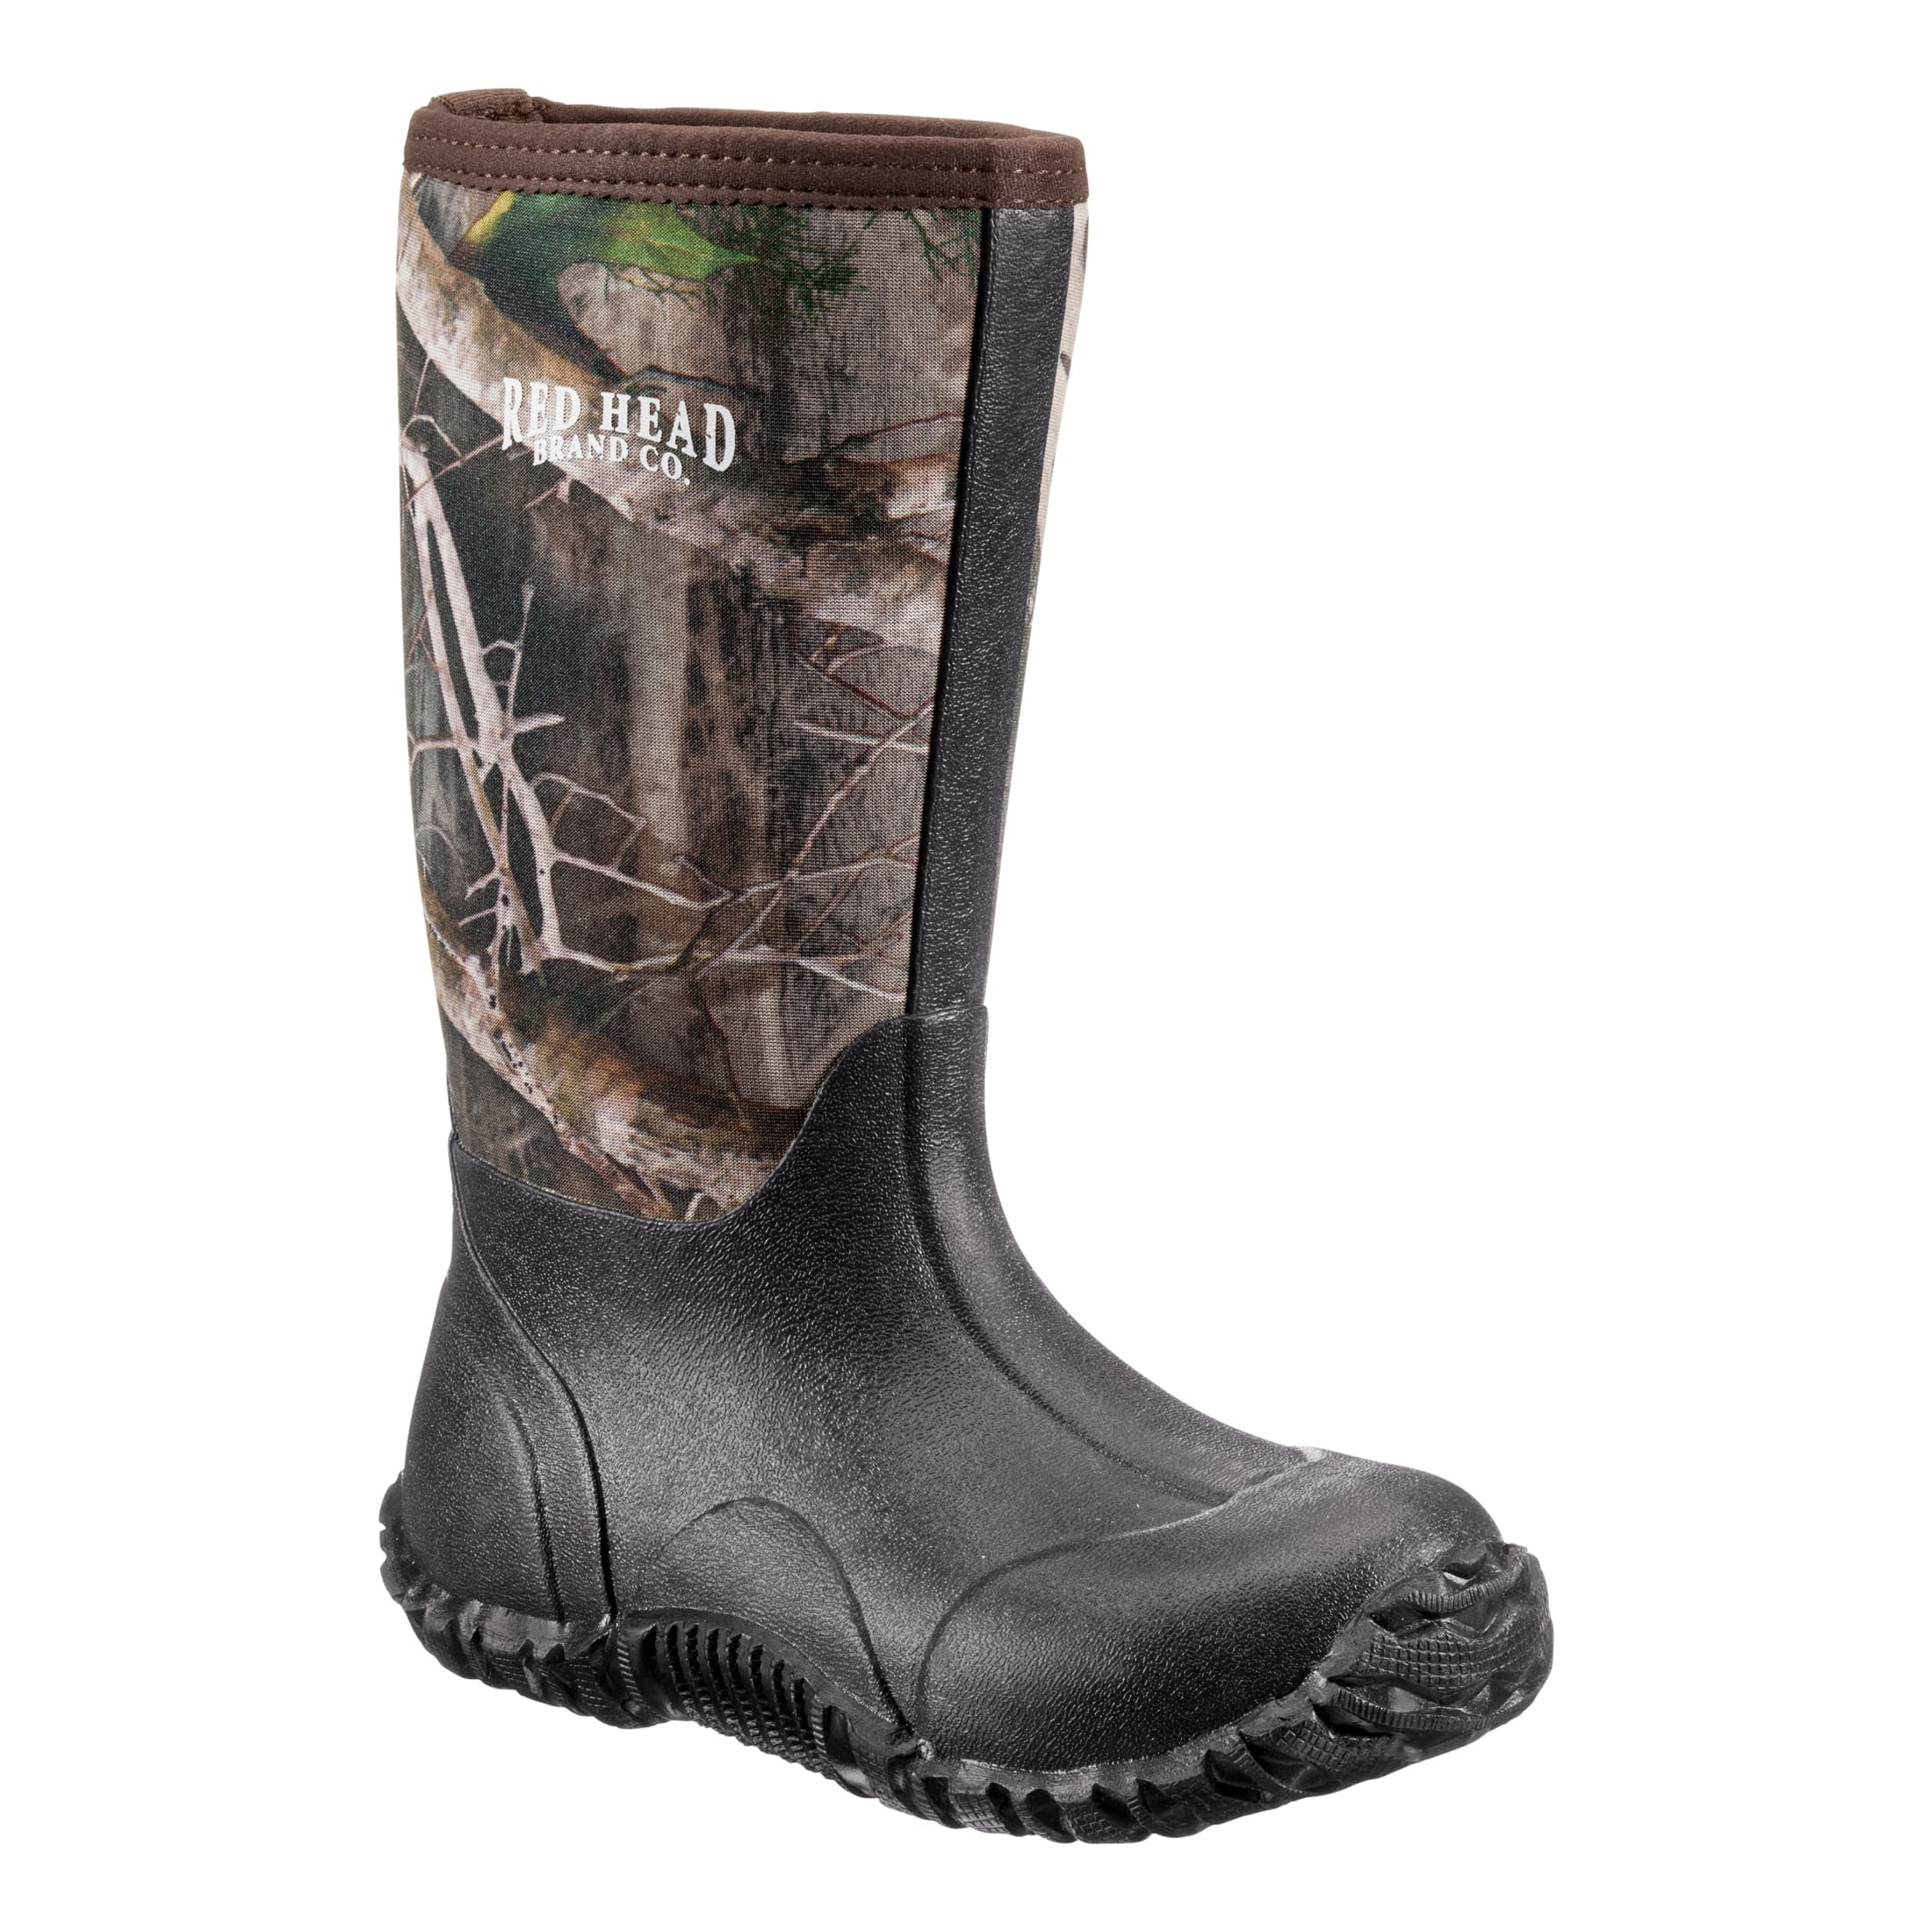 RedHead® Youth Neoprene Boots | Cabela's Canada